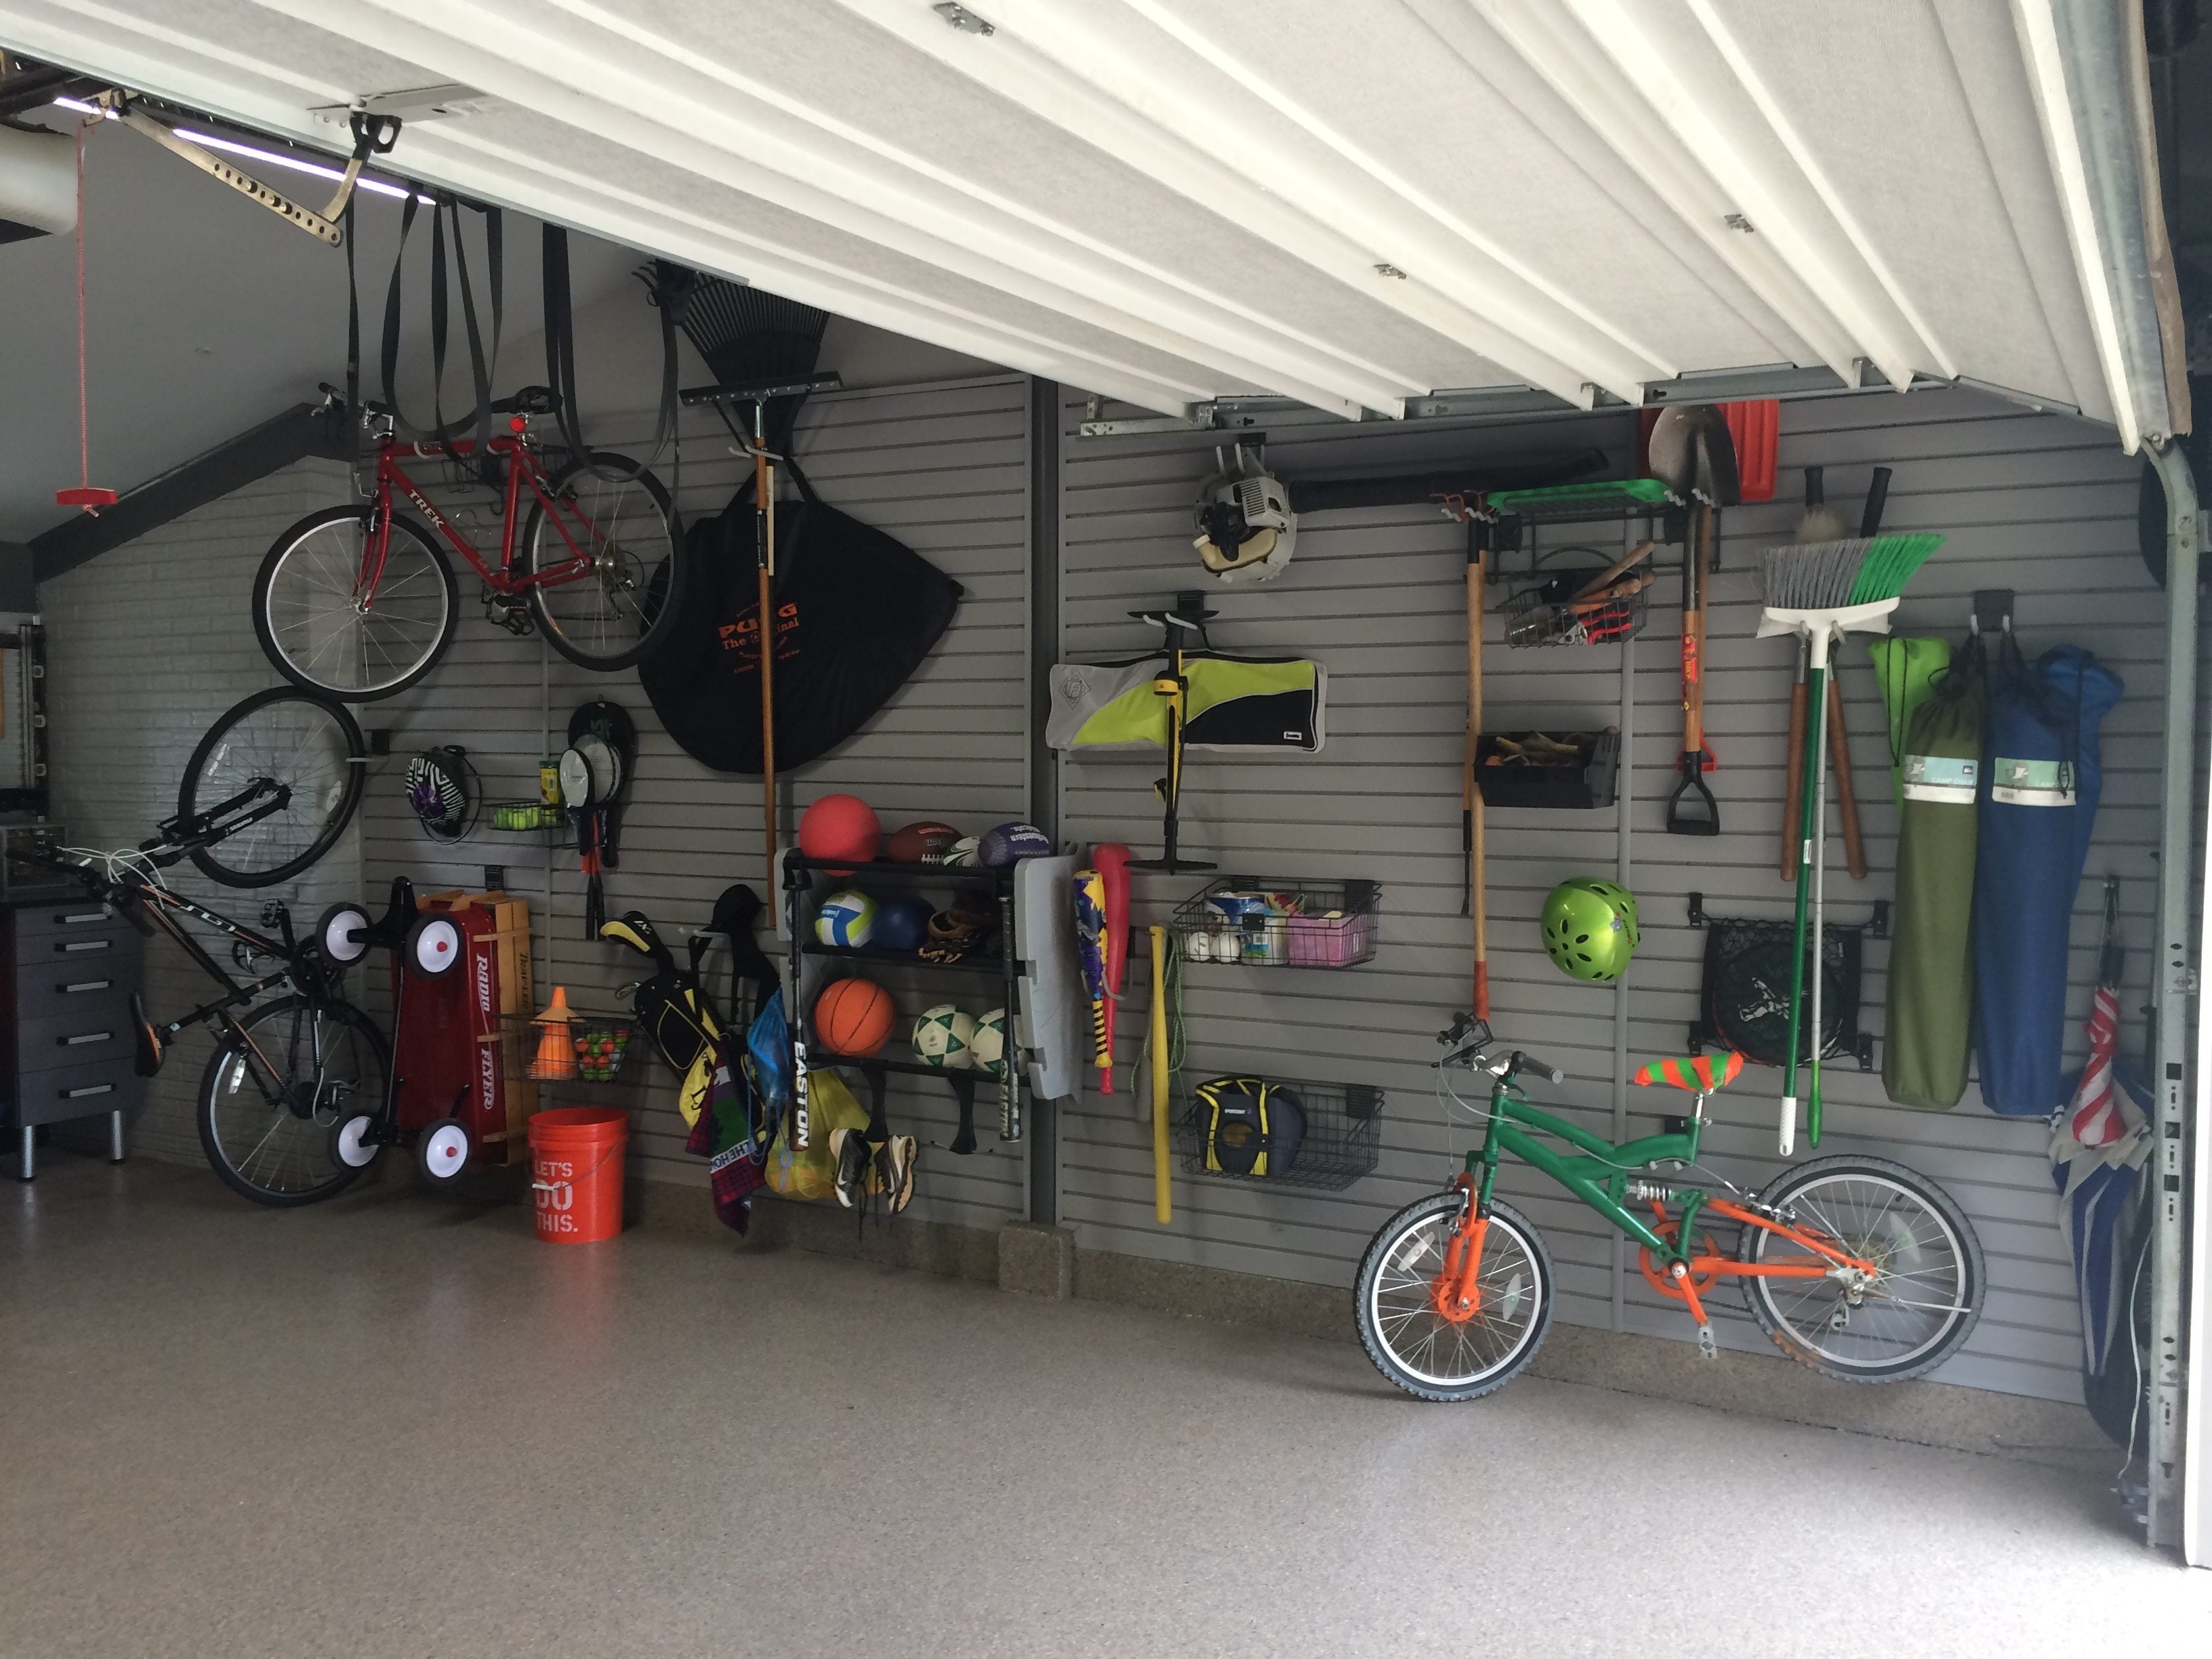 Todd Carter of Tailored Living featuring Premier Garage decided to clean up a messy garage space to make it more attractive and useful. Carter added wall storage systems and flooring to transform the space into a workout room.